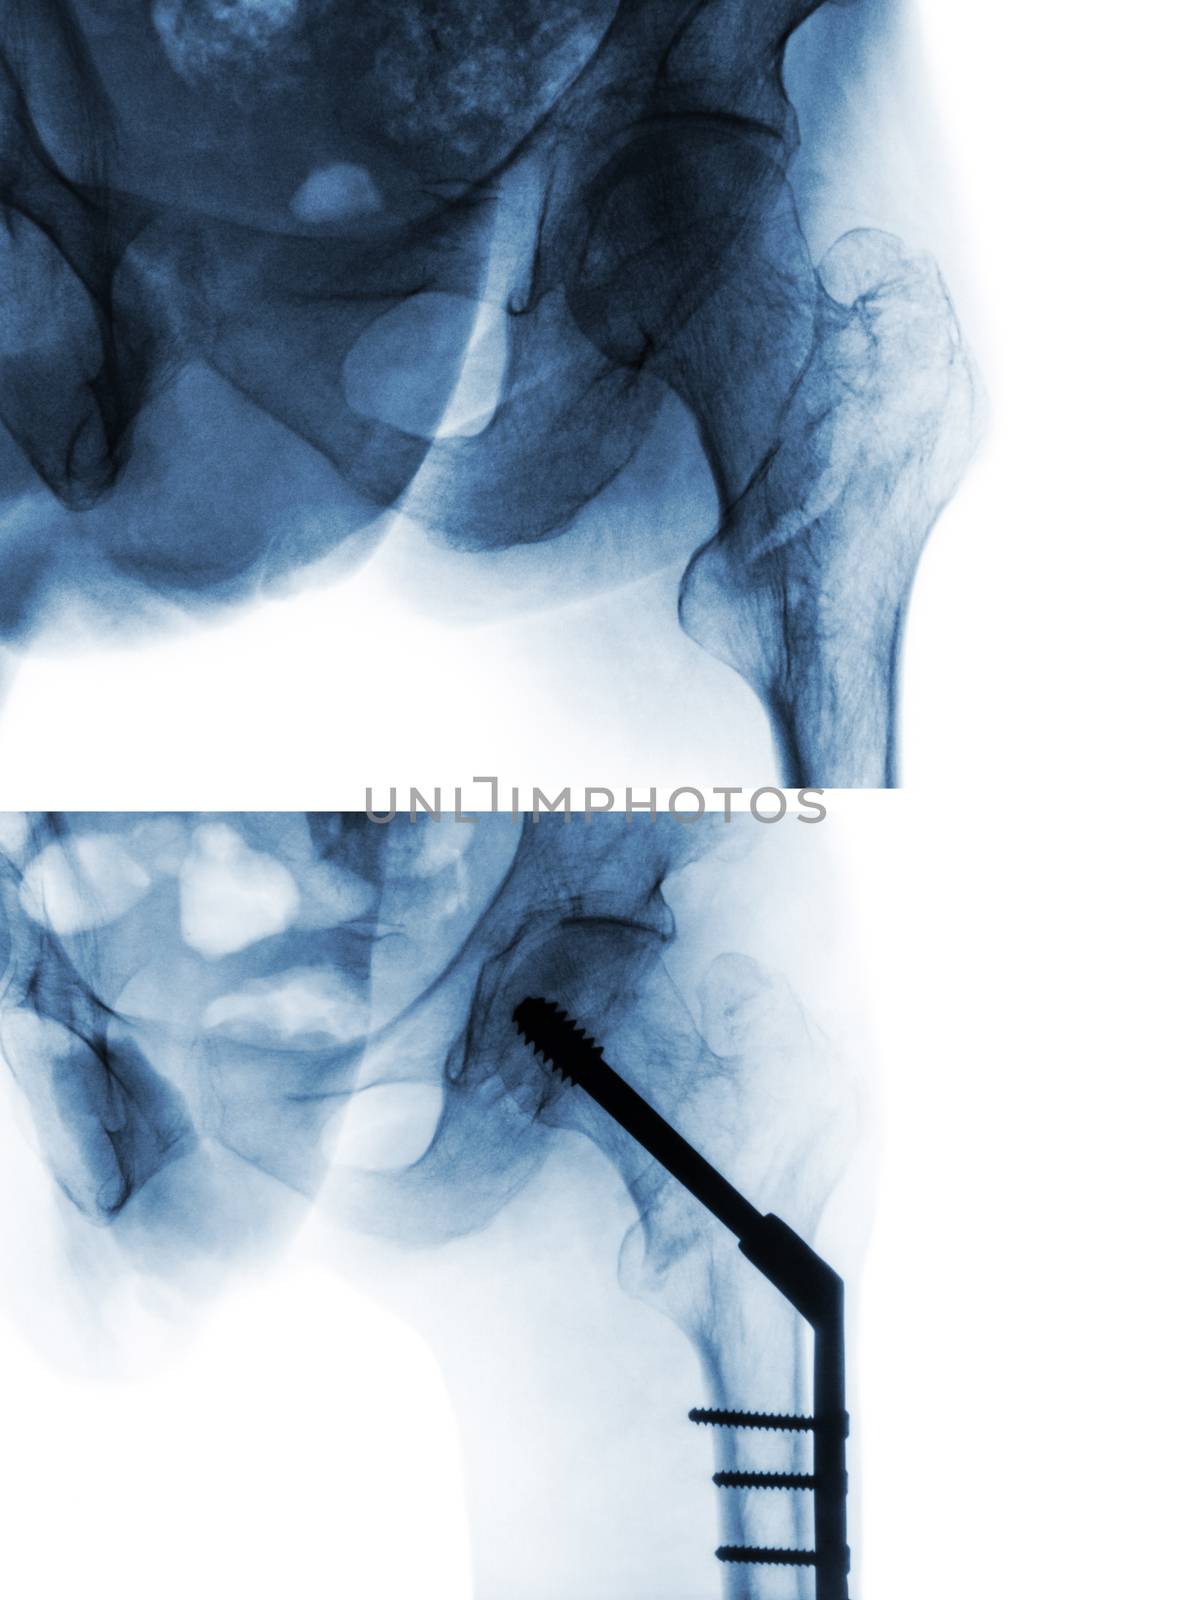 Intertrochanteric fracture femur ( thigh bone ). X-ray of hip and comparison between before surgery (upper image) and after surgery (lower image). Patient was operated and insert intramedullary nail .